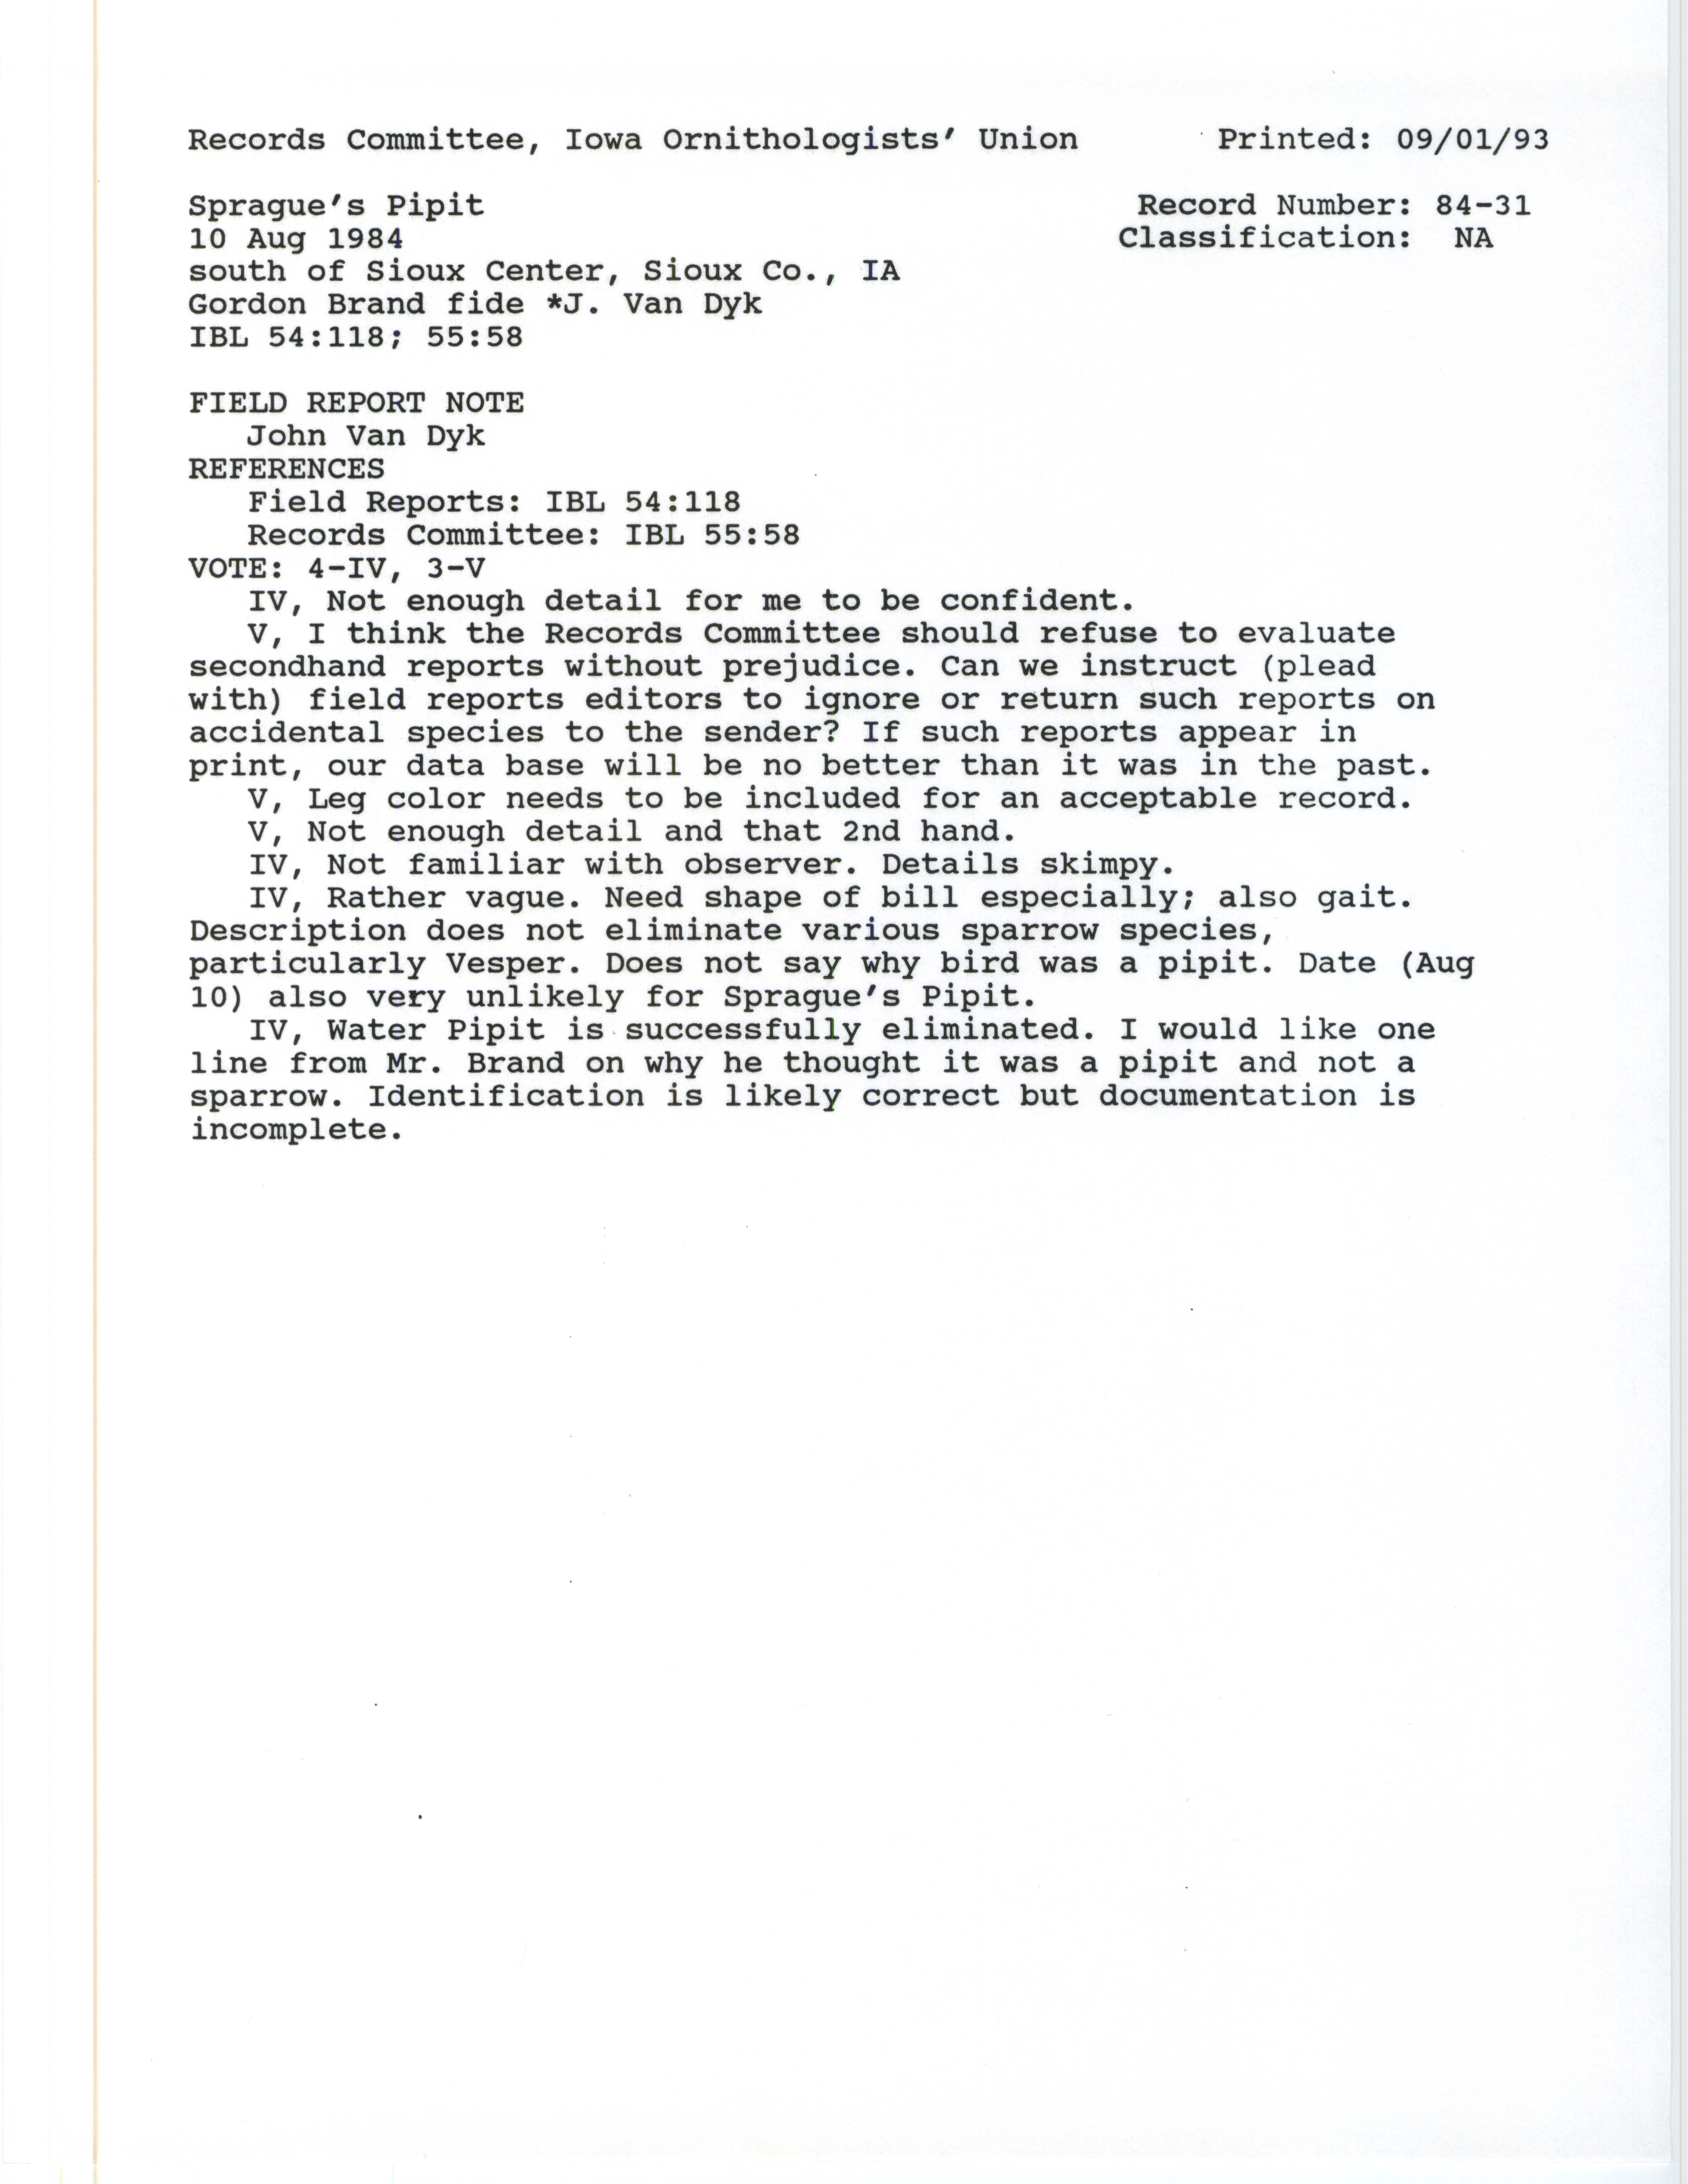 Records Committee review for rare bird sighting for Sprague's Pipit south of Sioux Center in 1984